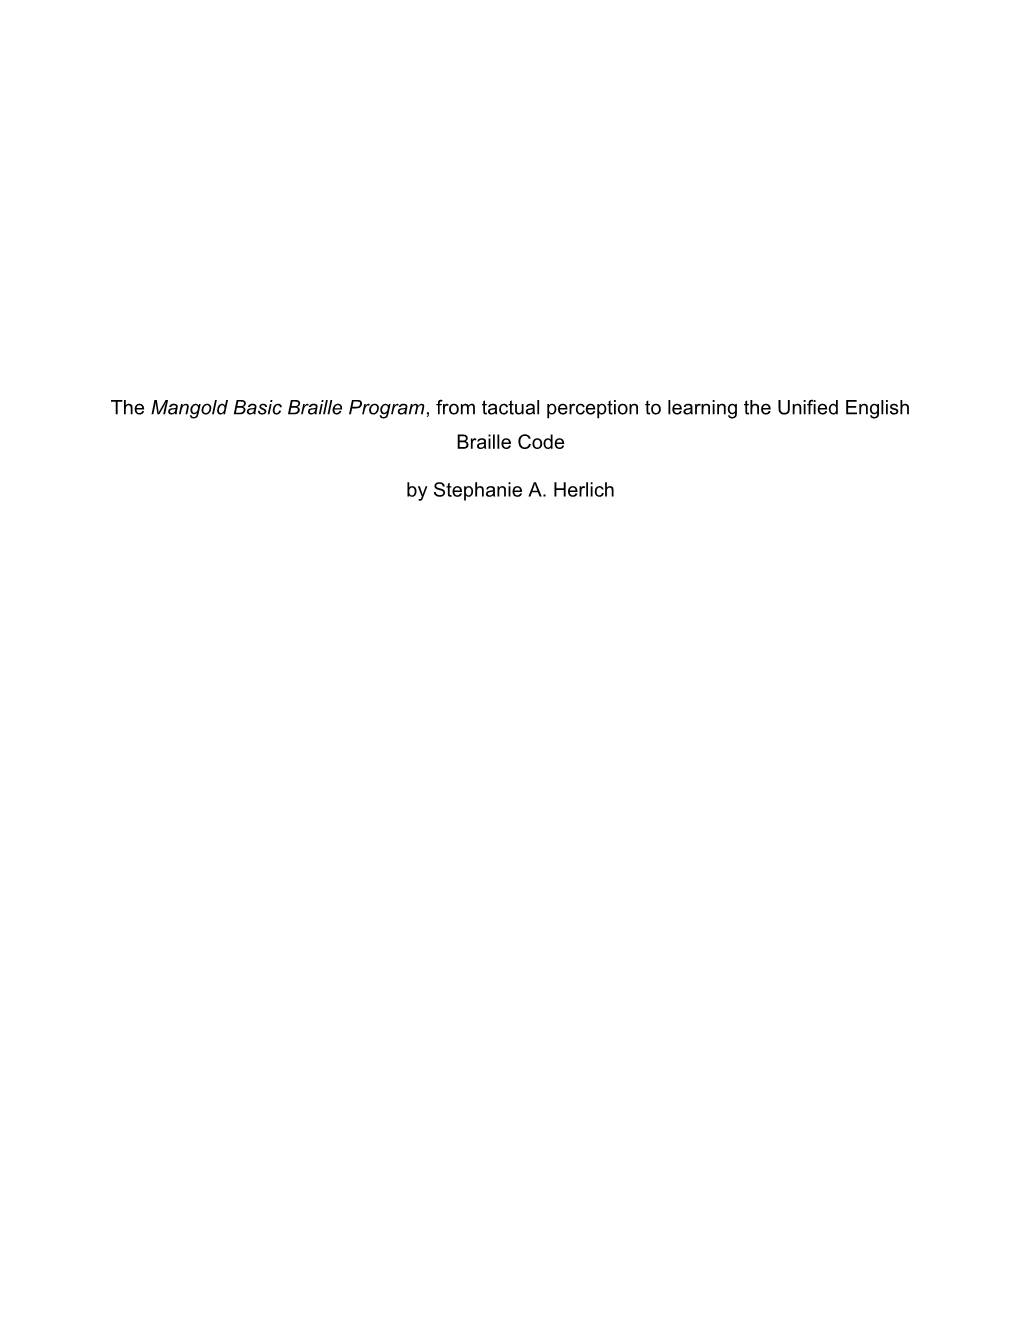 The Mangold Basic Braille Program, from Tactual Perception to Learning the Unified English